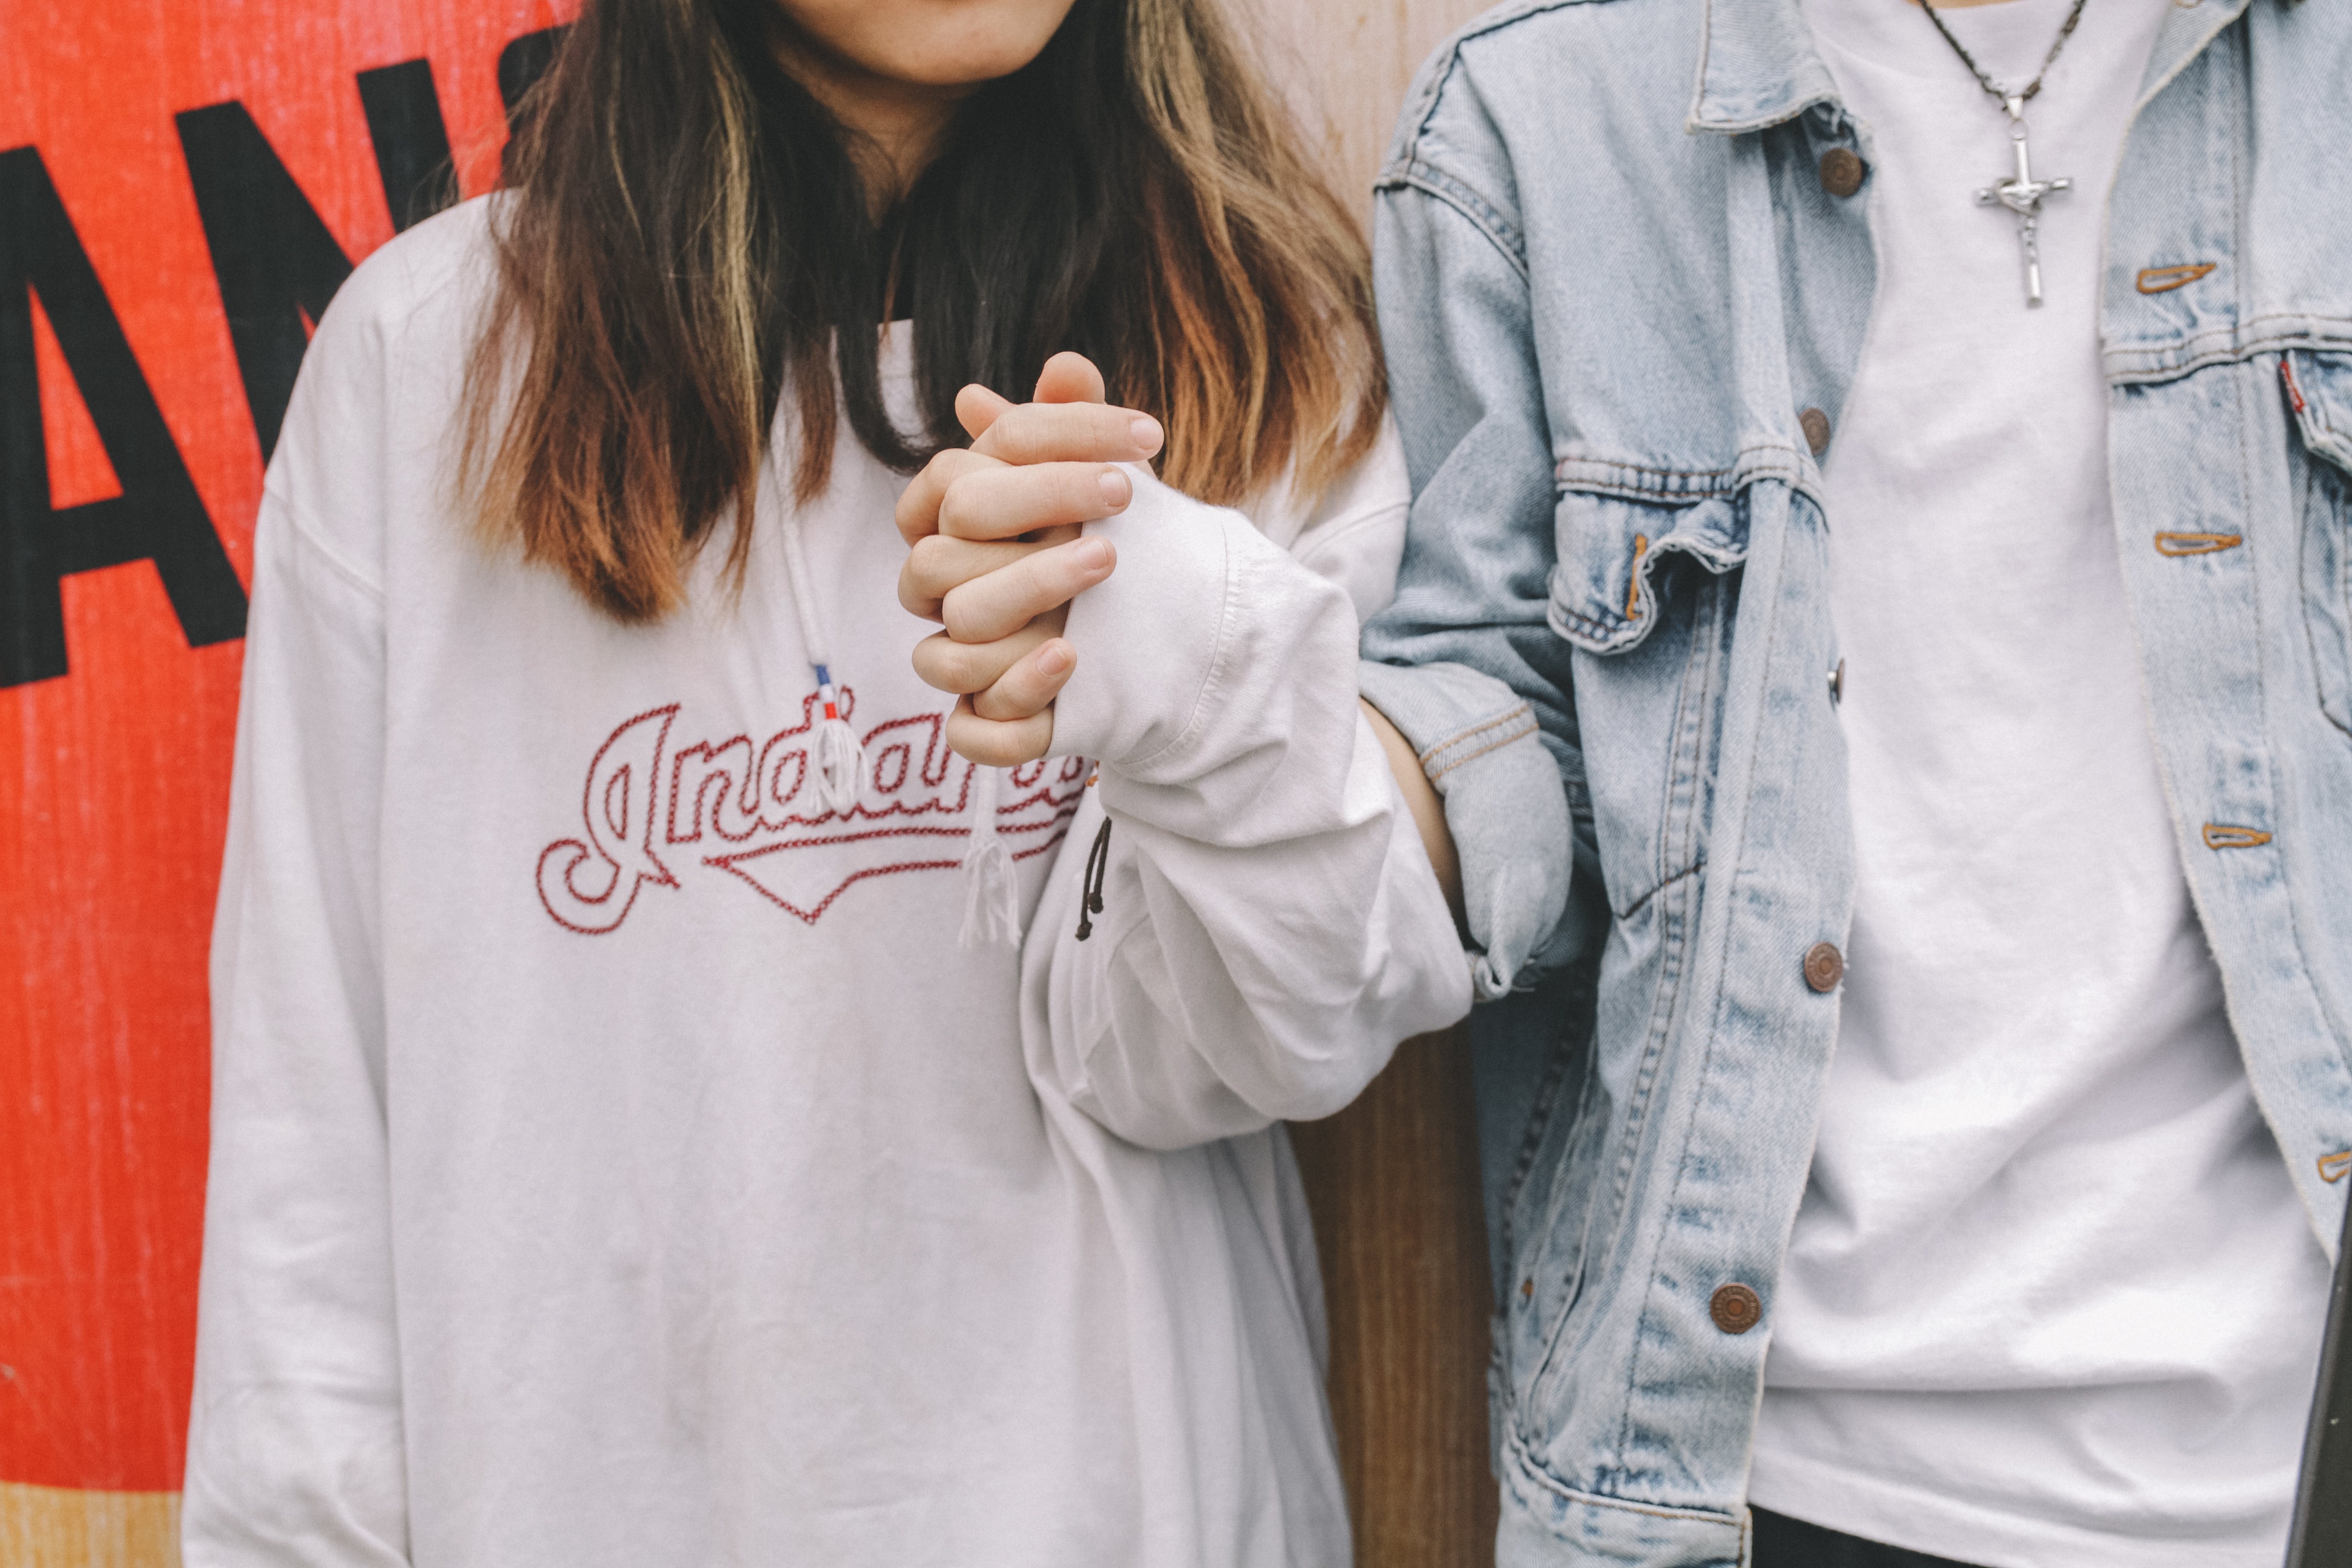 A young couple shown from the neck down, holding hands | Source: Pexels